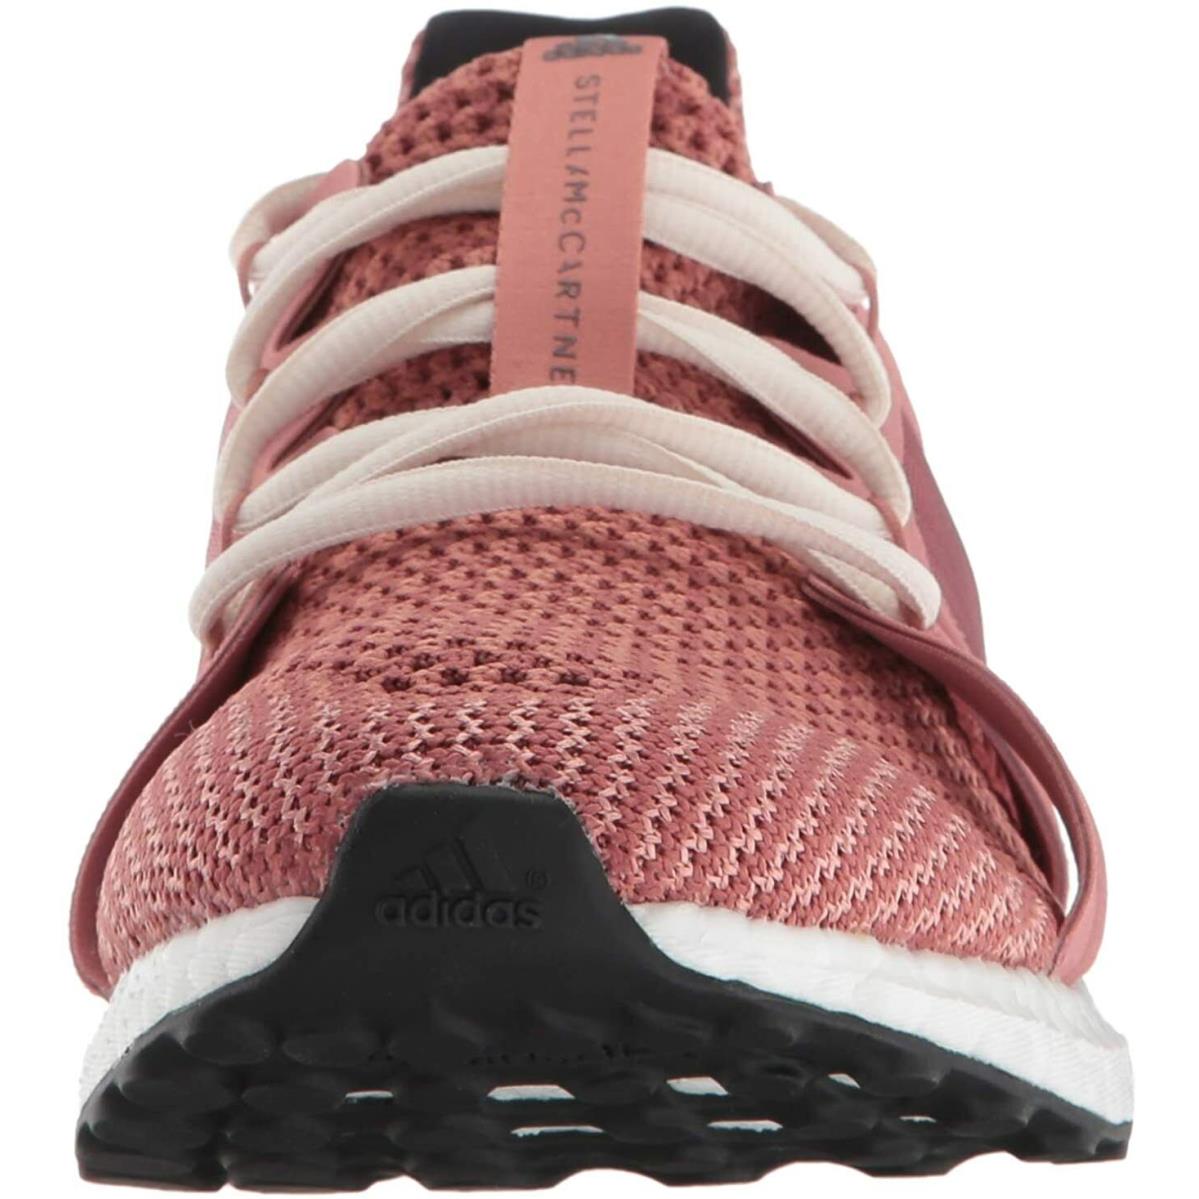 Adidas shoes Ultraboost - Raw Pink/Coffee Rose/Black 2